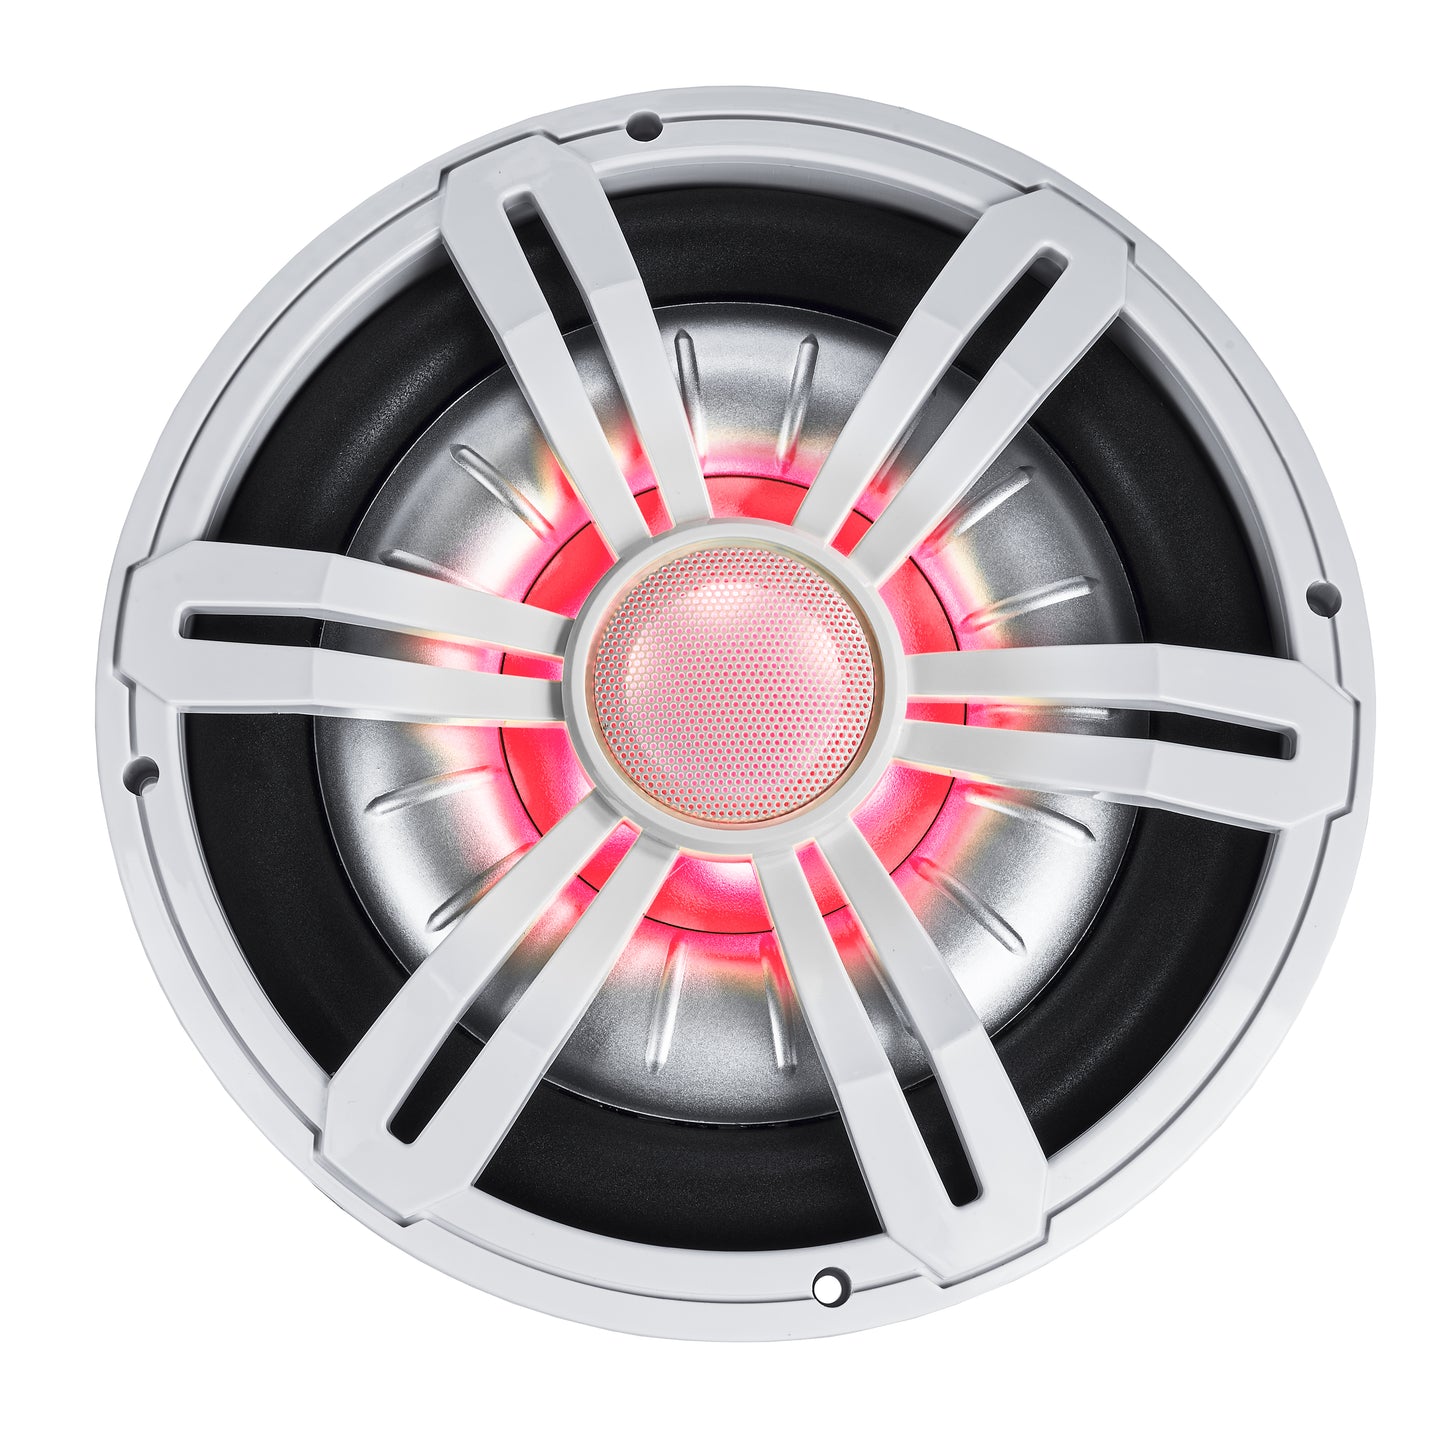 BMSS10RW 800W Peak (400W RMS) 10" Shallow Marine Subwoofer with Multi-color LED Lighting